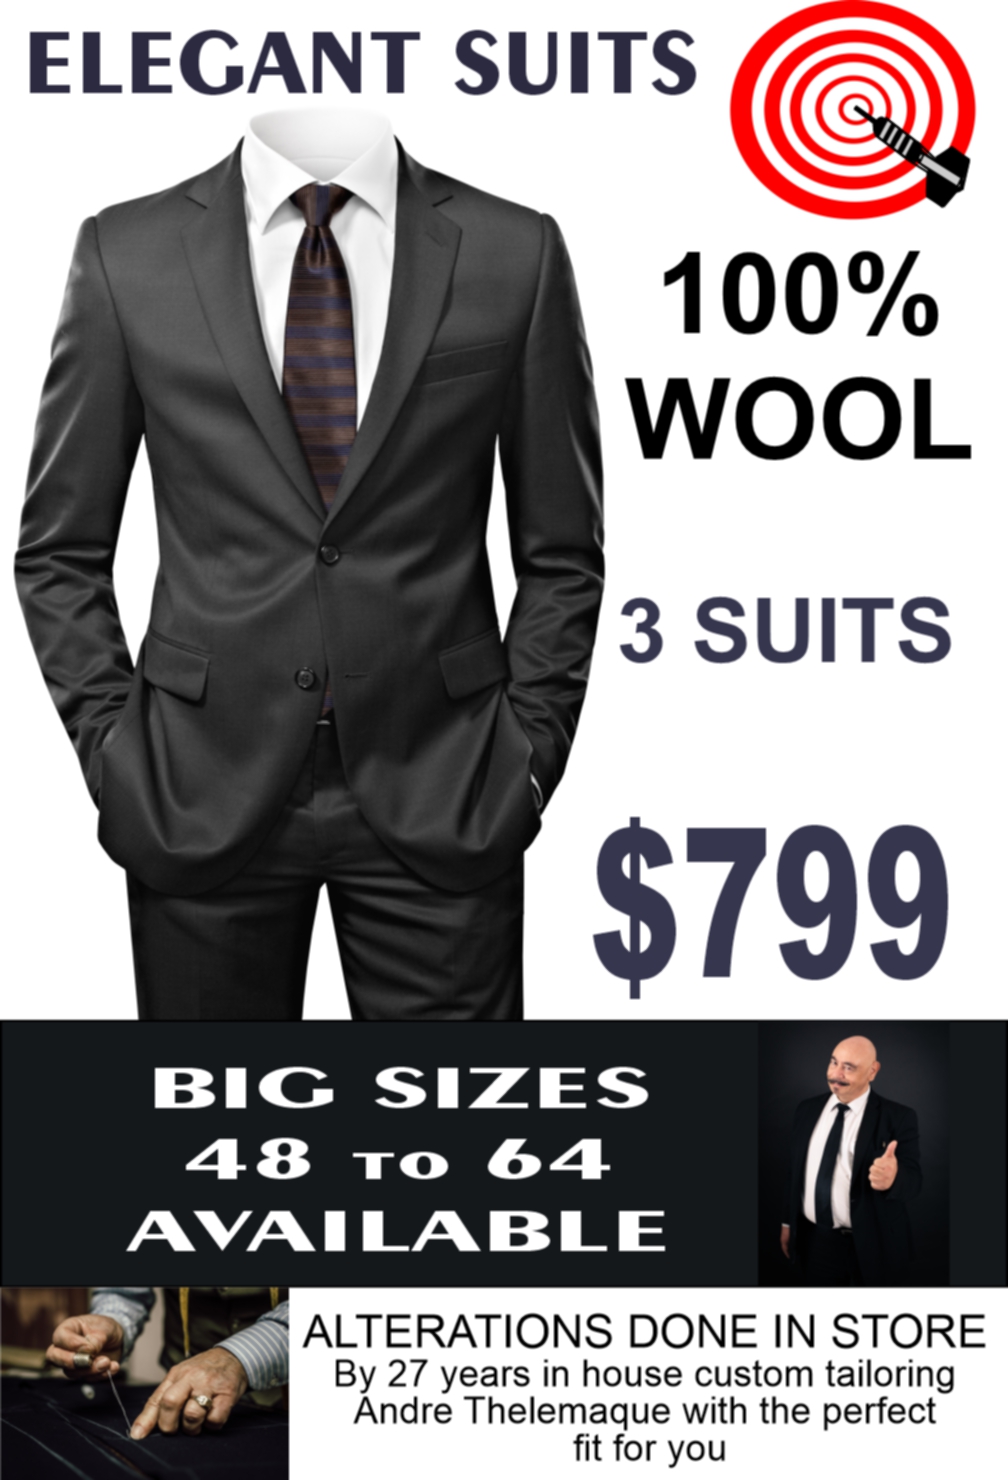 Unbeatable deals on suits - SHELLY BLOOM'S